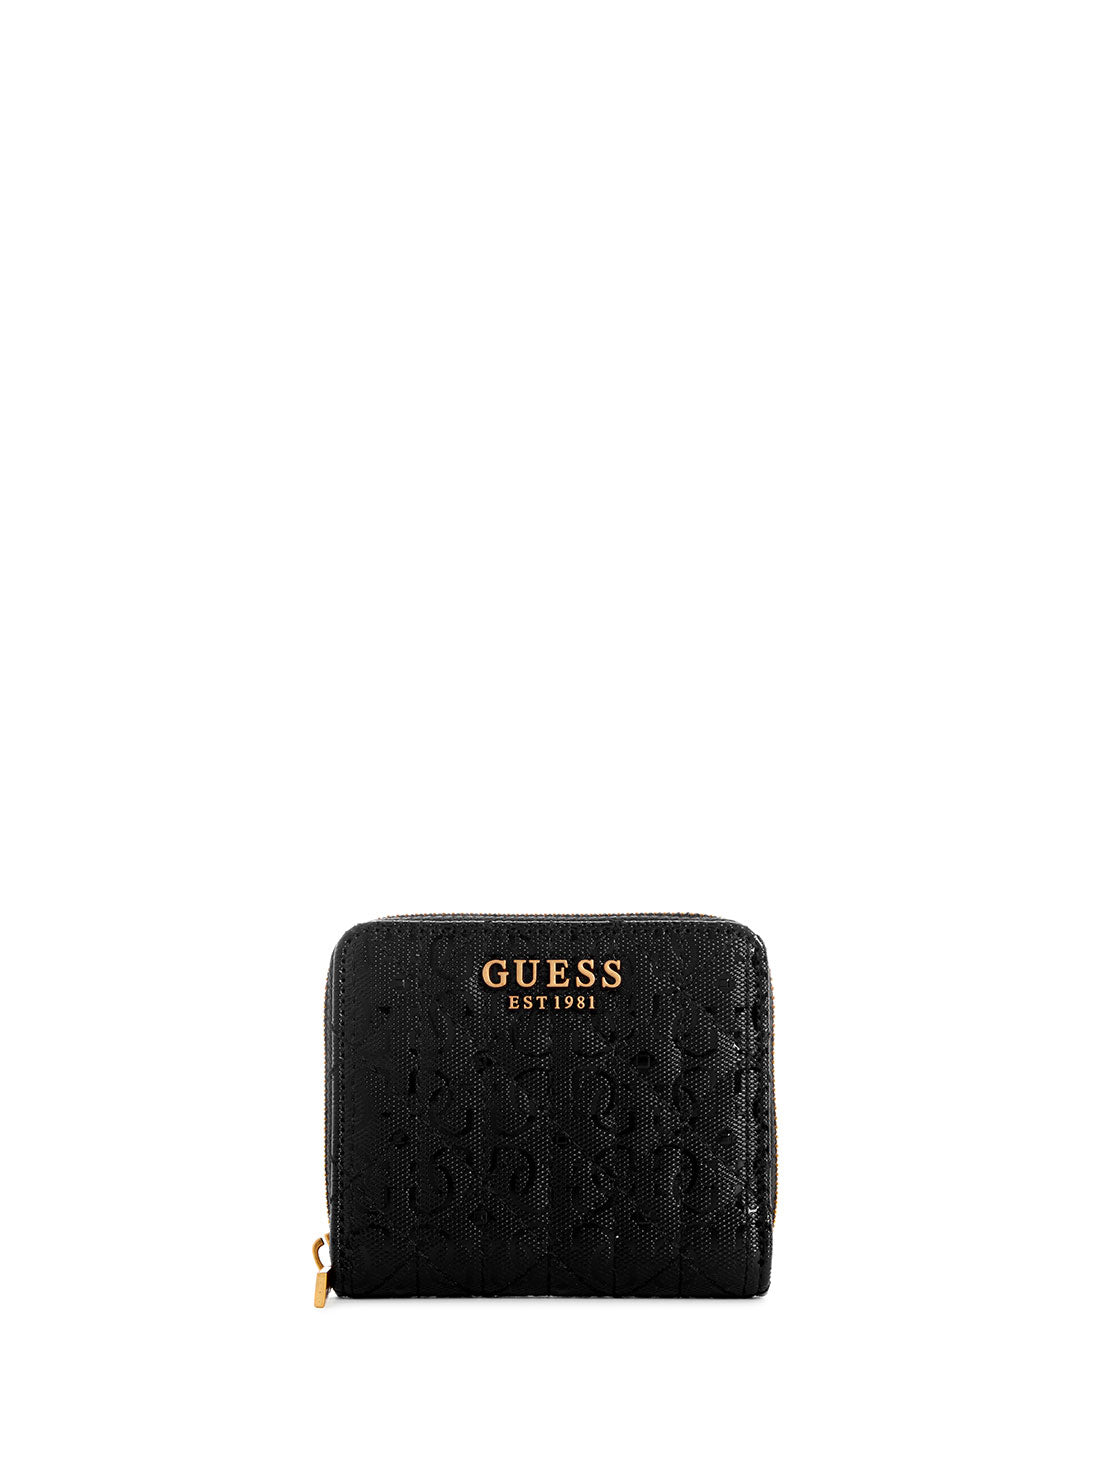 GUESS Women's Black Aveta Quilted Small Wallet GB898737 Front View